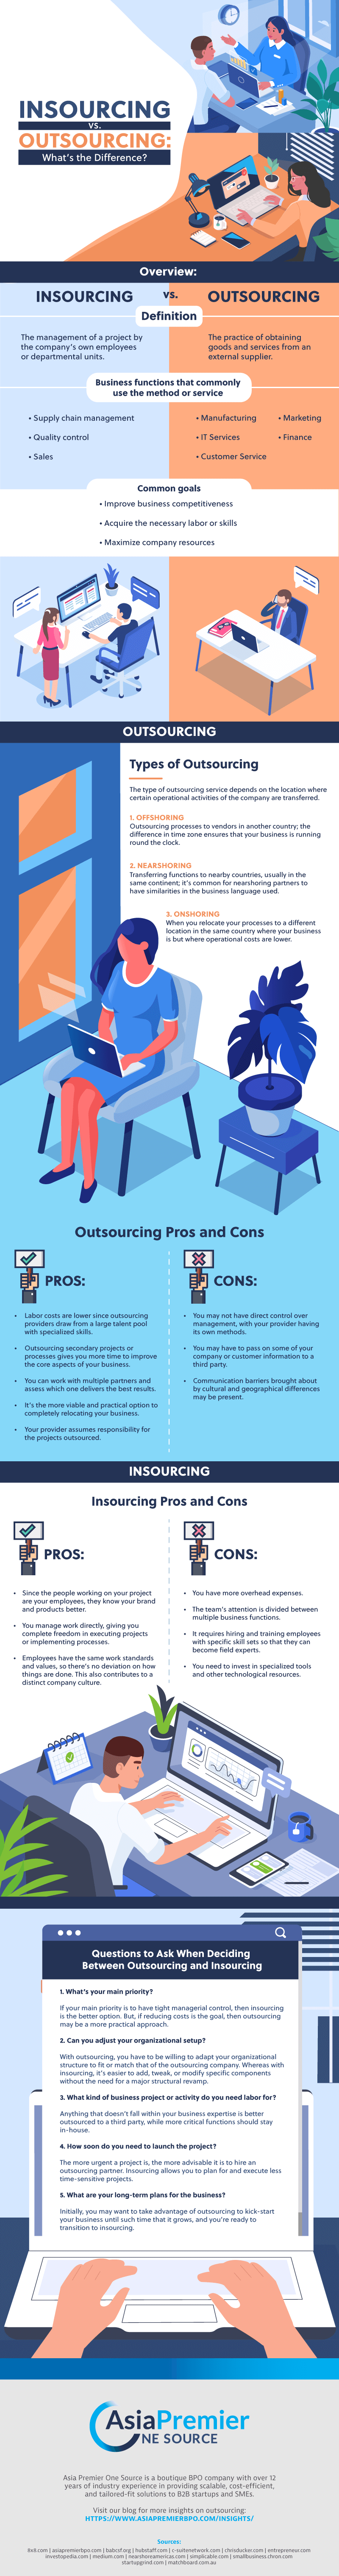 Difference between Insourcing and Outsourcing